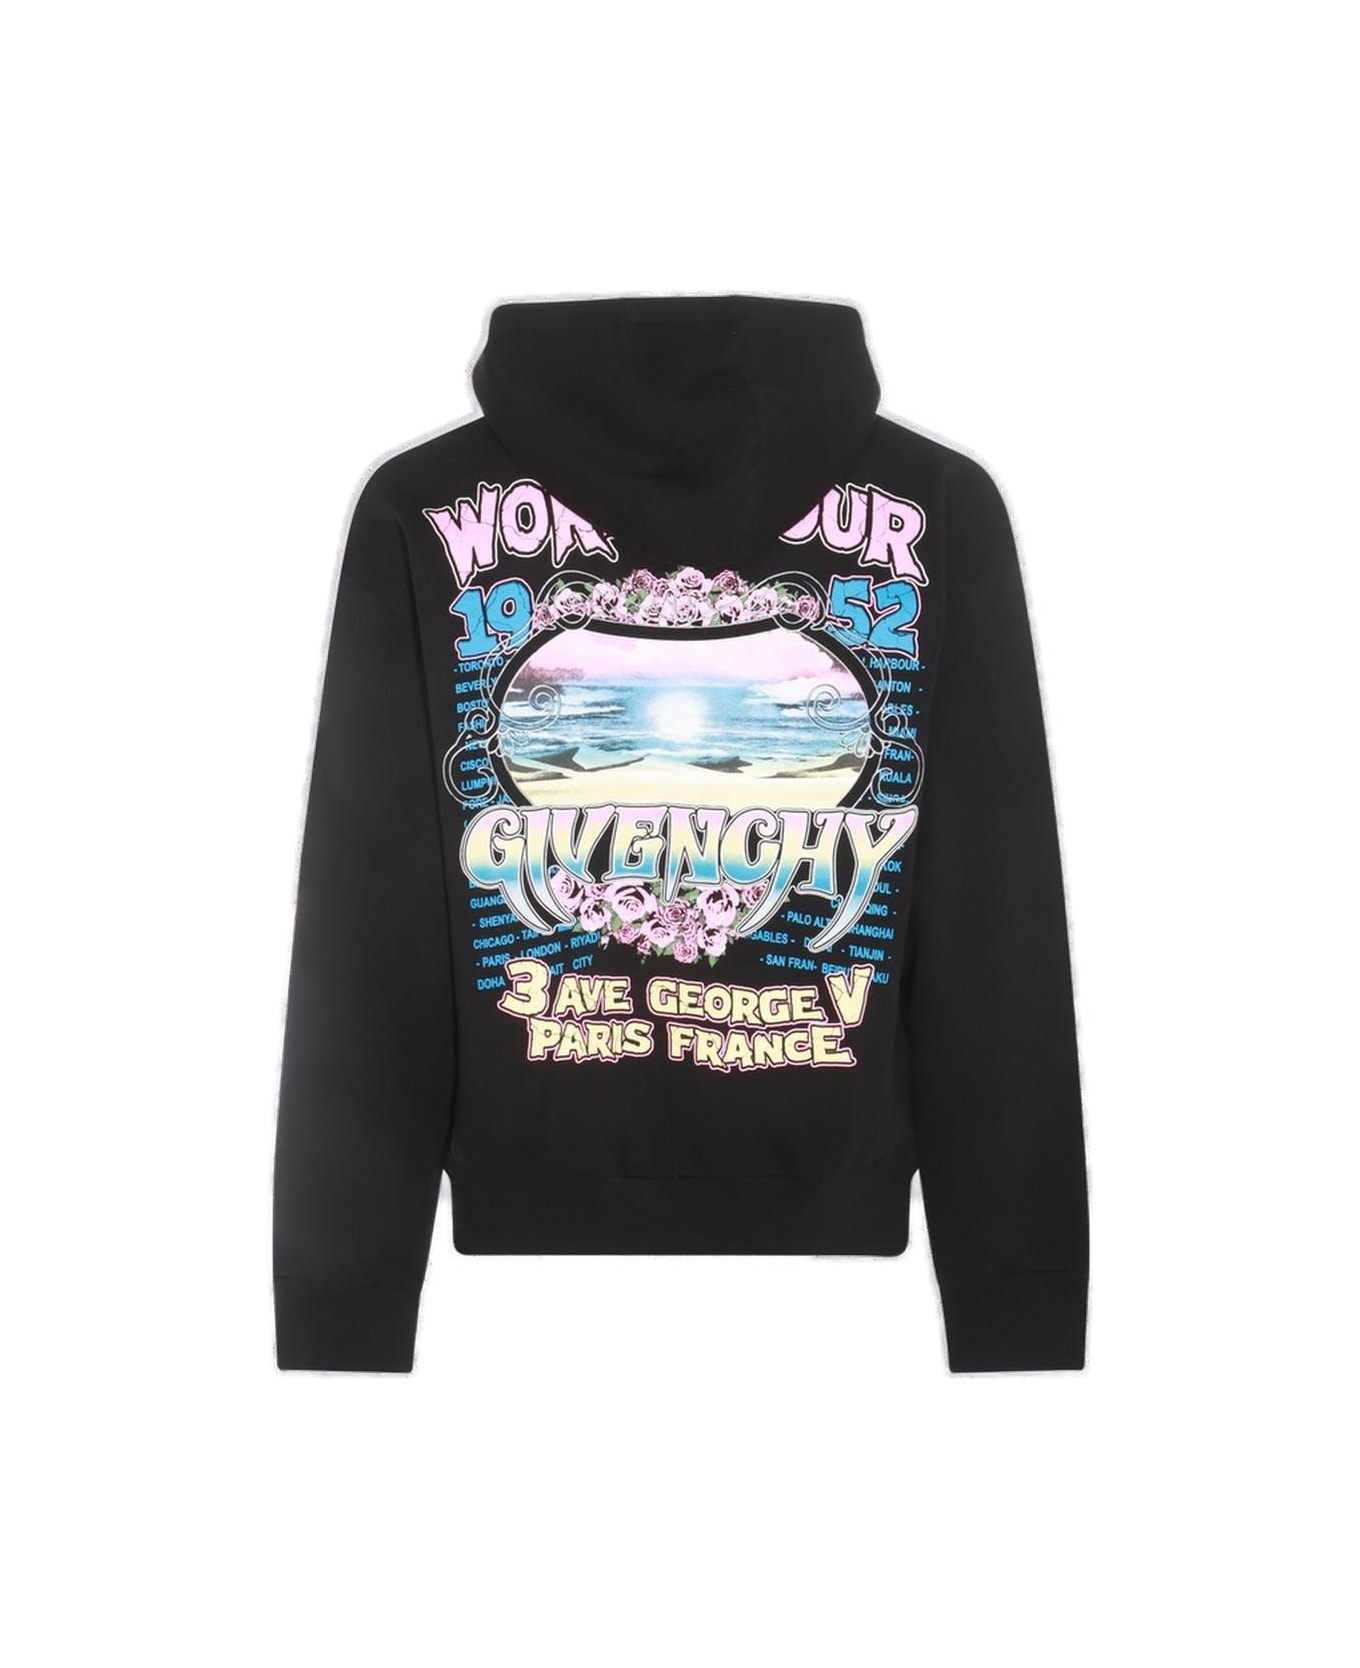 Givenchy Graphic Printed Zipped Hoodie - Black